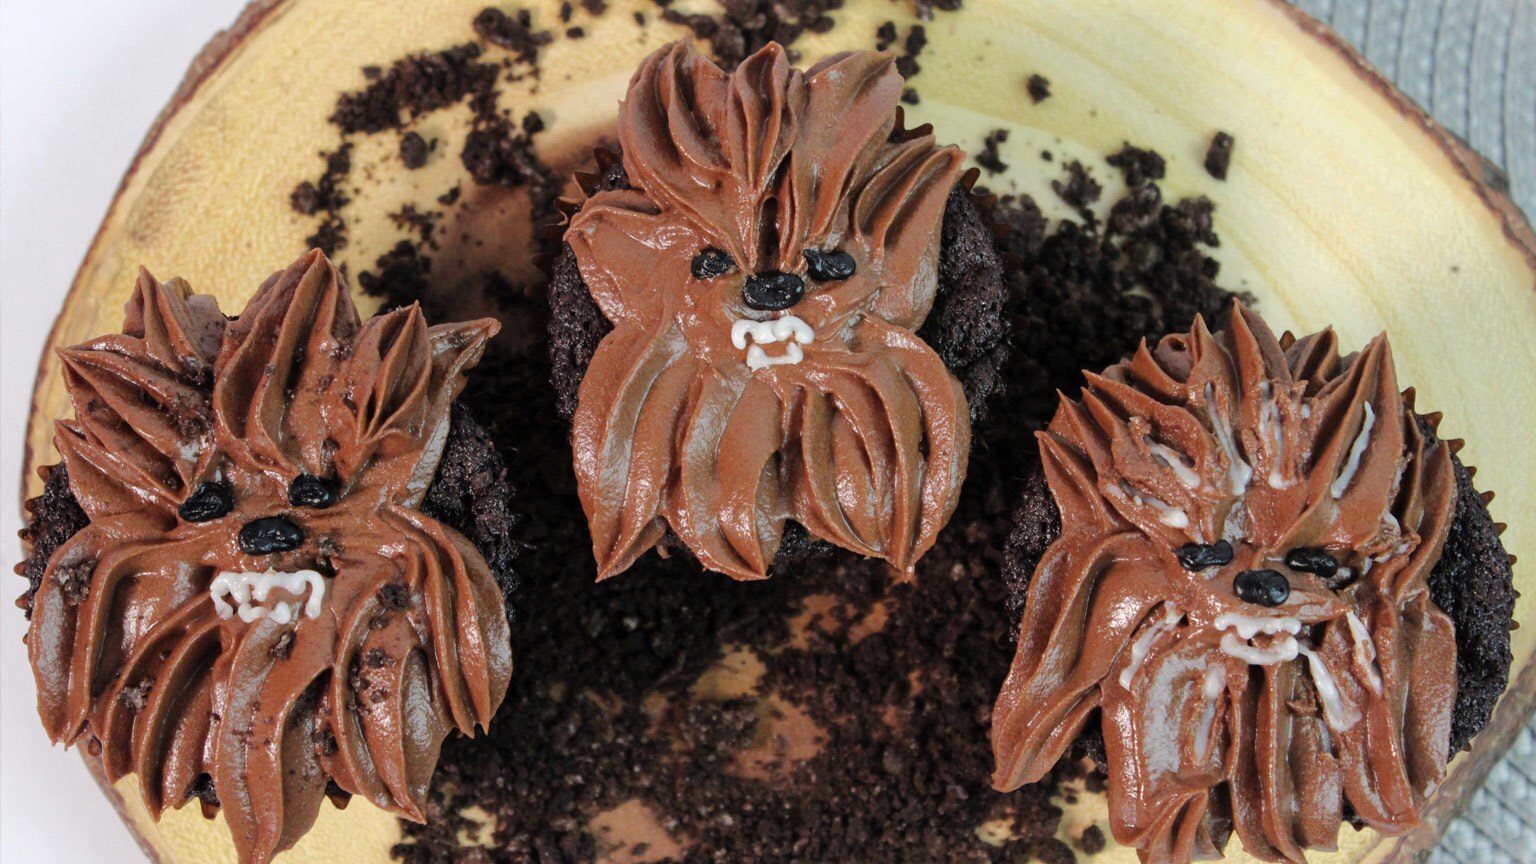 Bake Some Wookiee Cookie Brownies for a Delicious Life Day Dessert